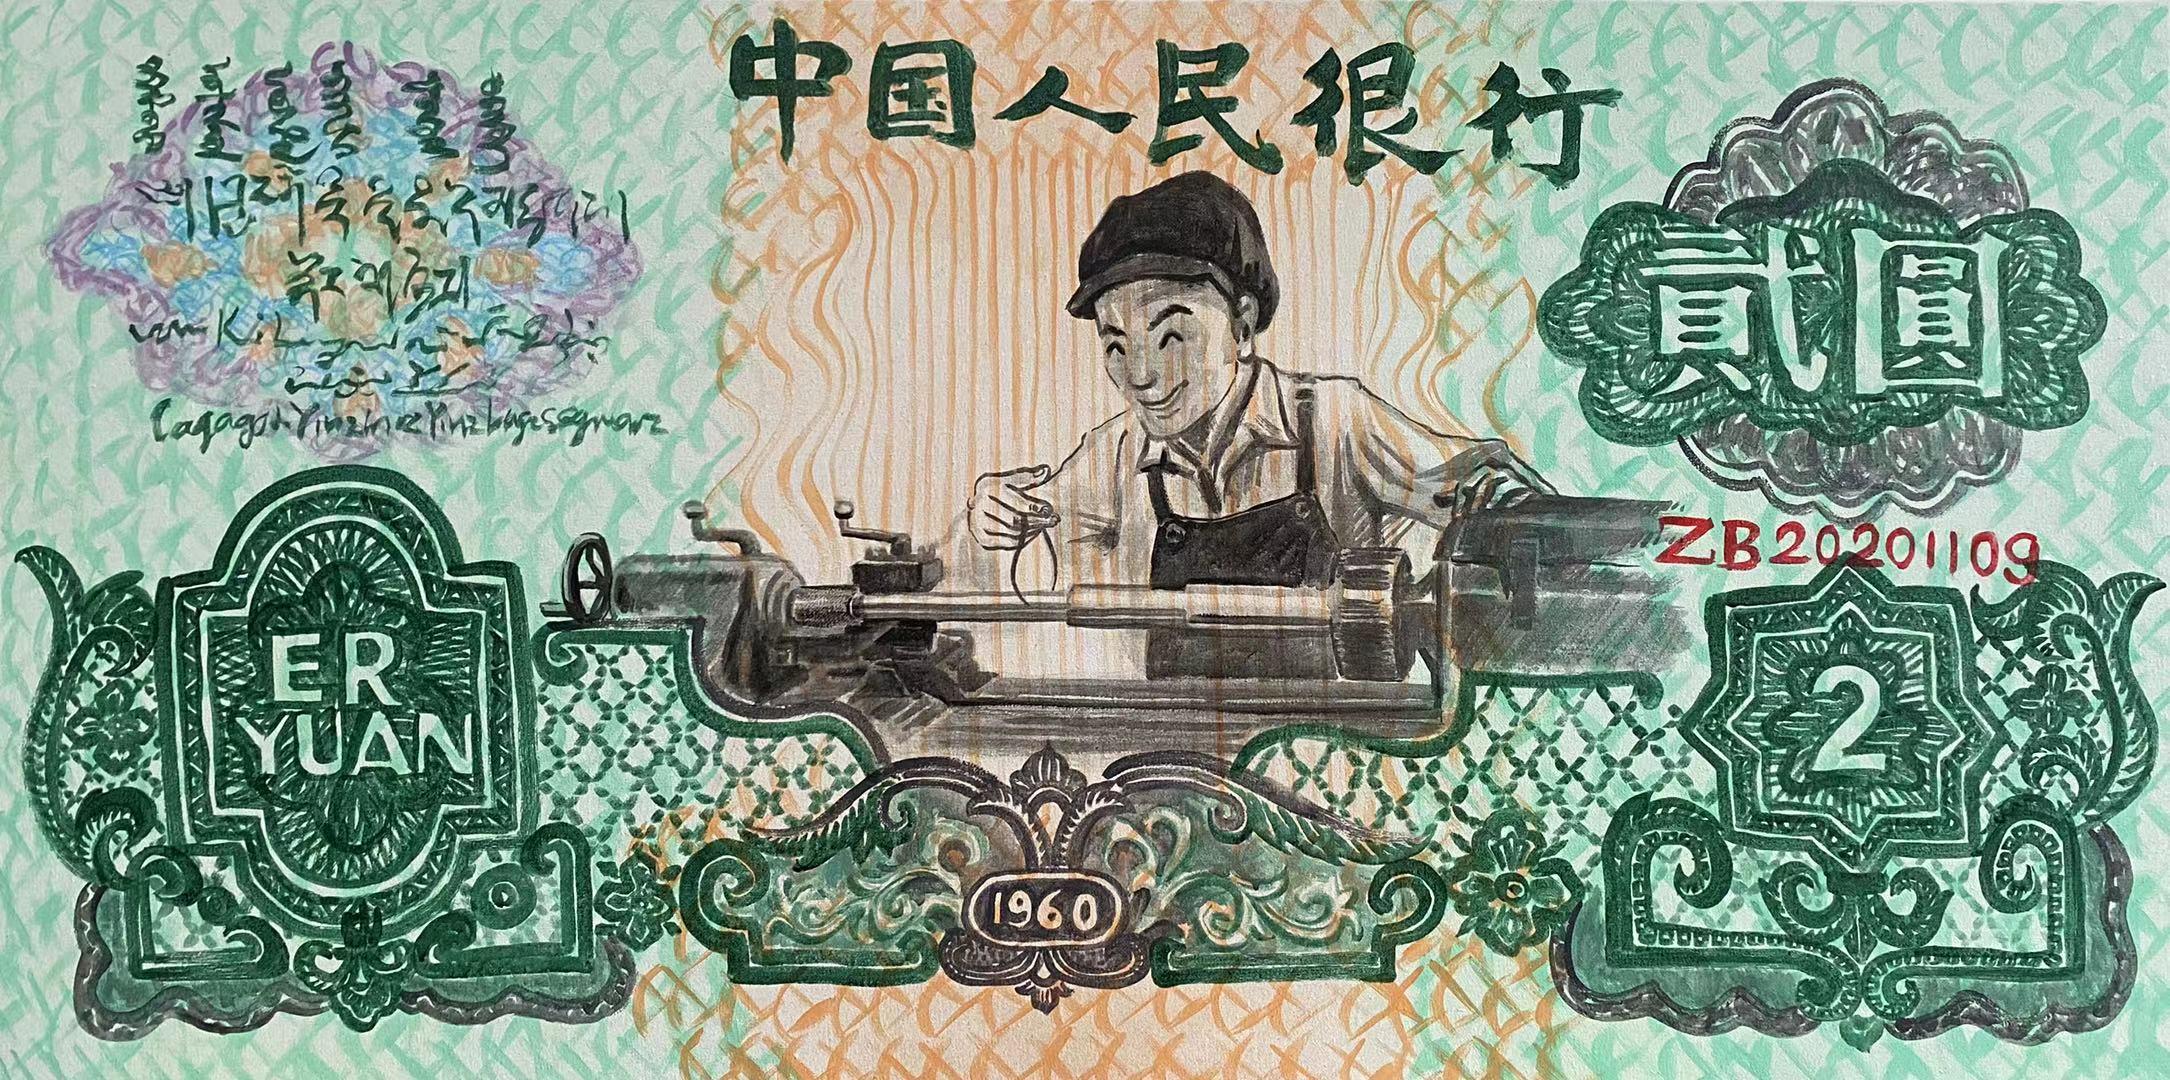 Zhang Bo Interior Painting - Paper Money RMB Series Chinese Worker in 1960s Green Color